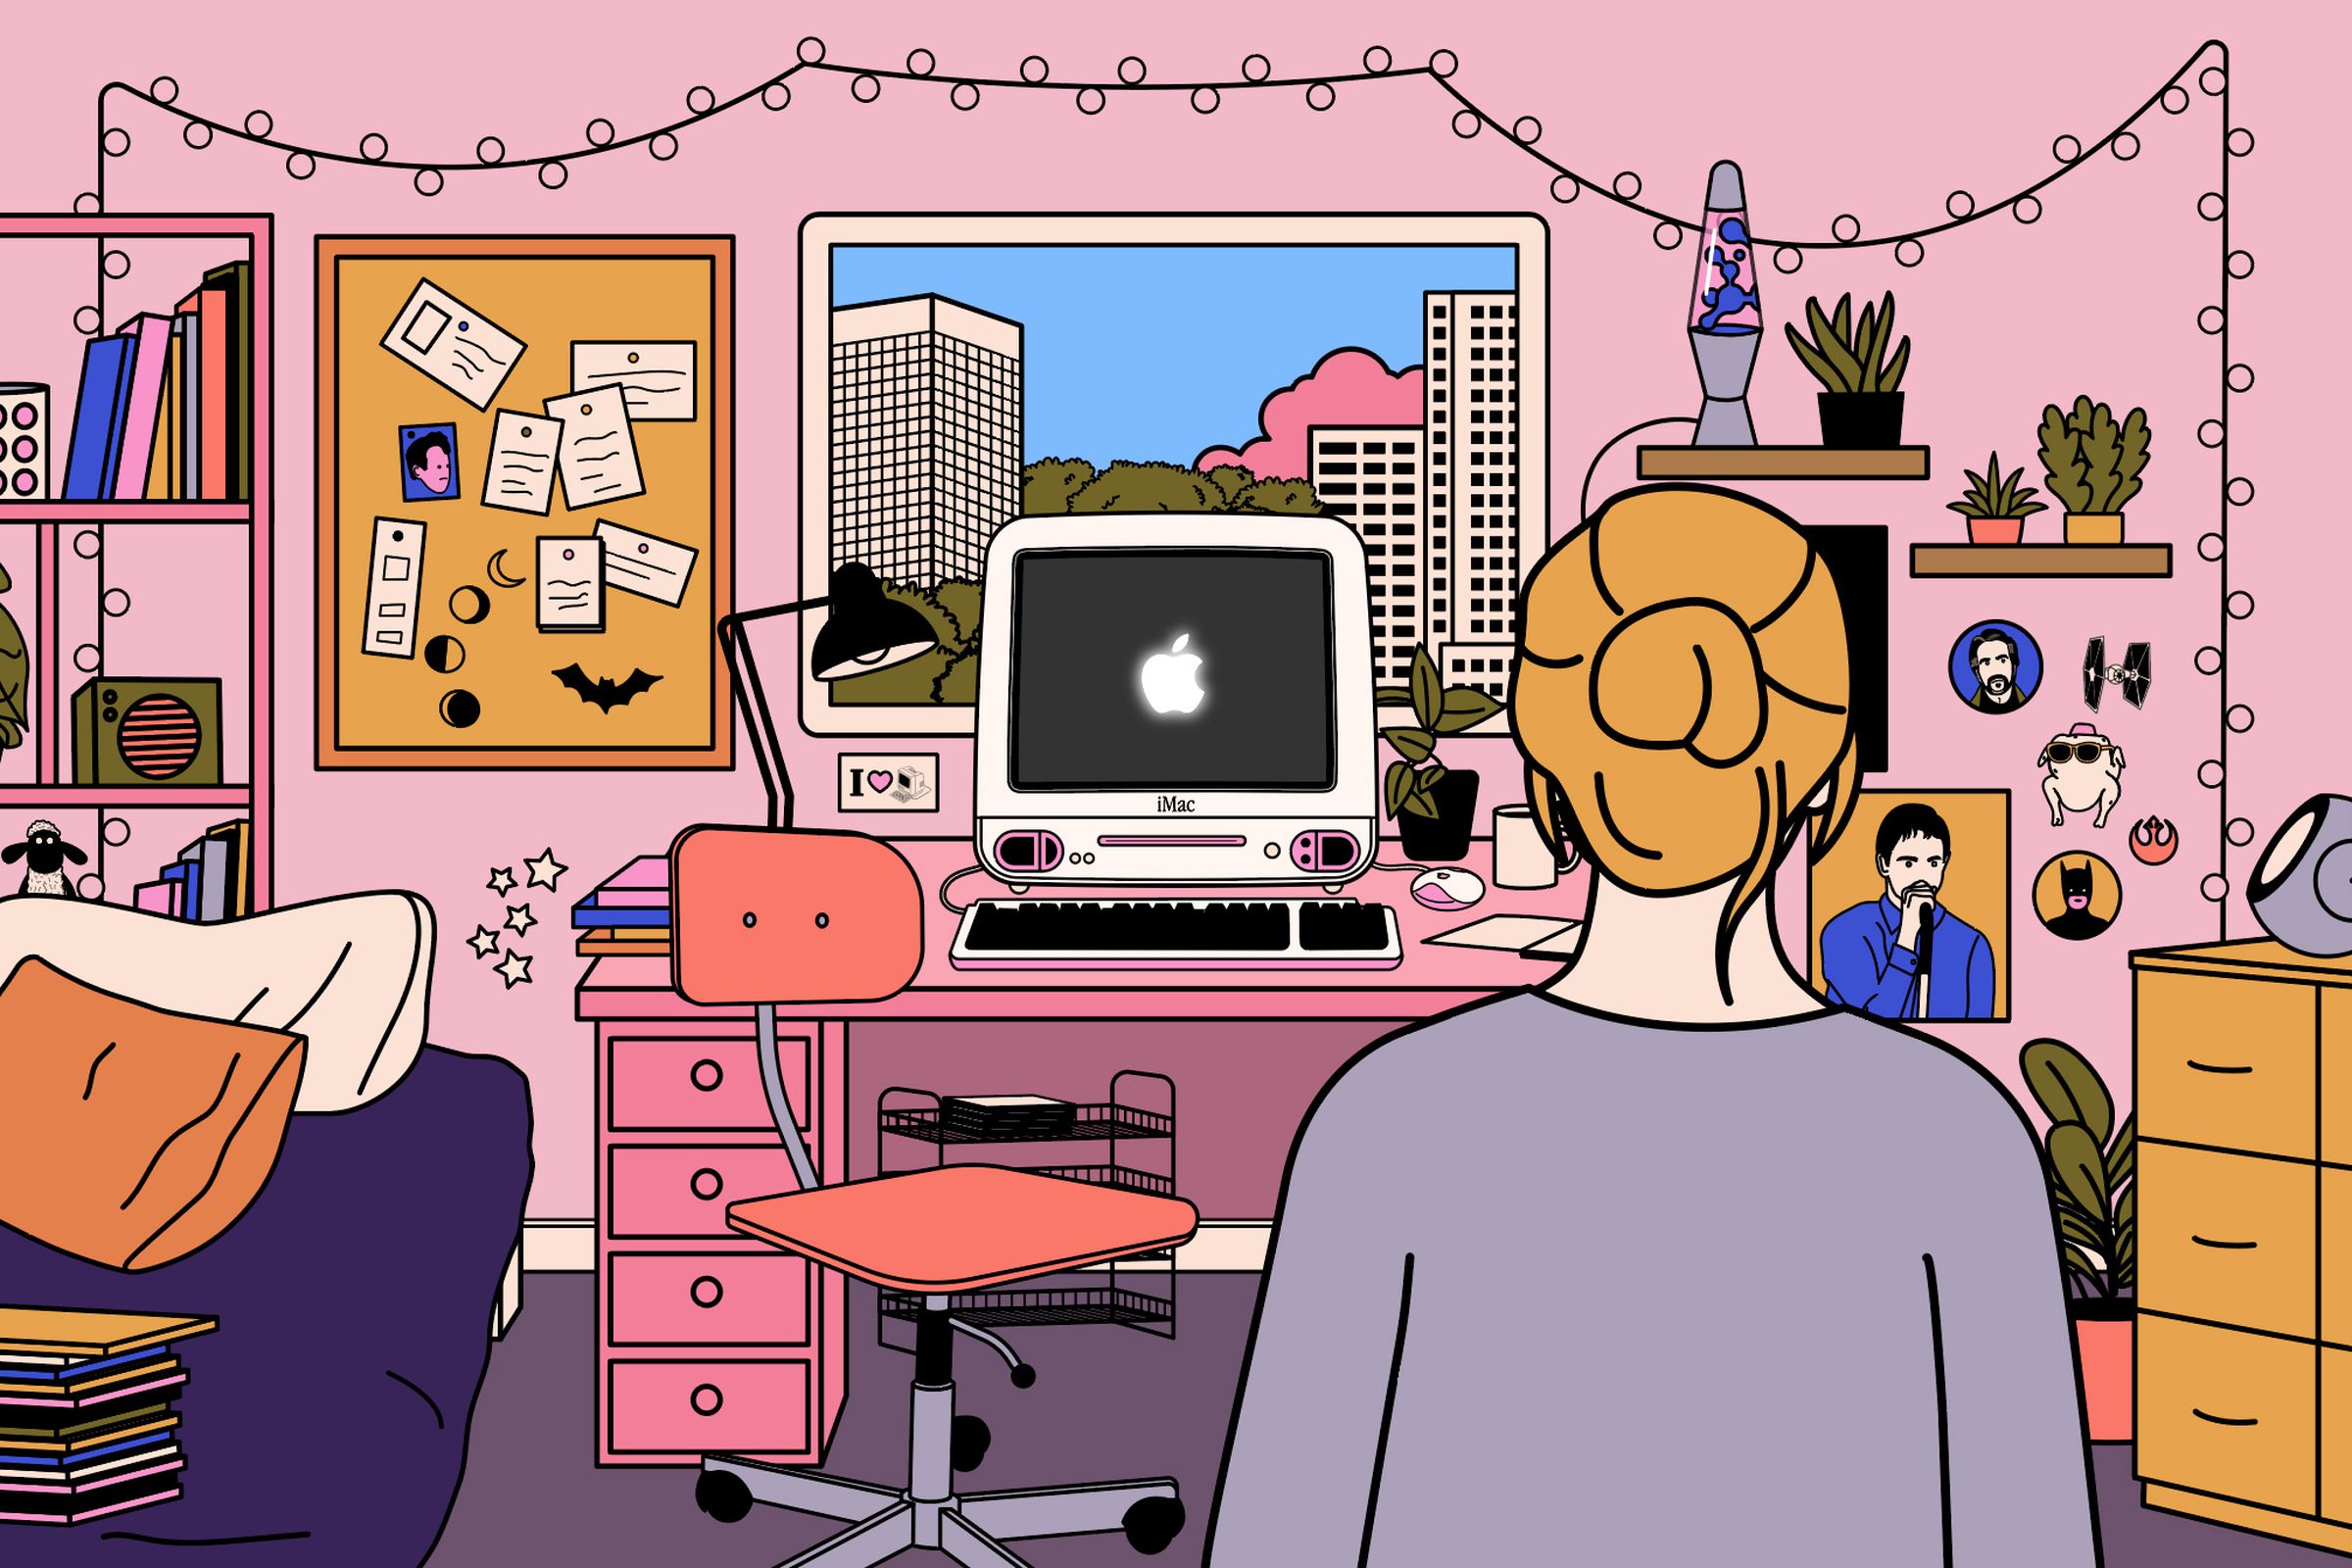 An illustration of a blonde white woman standing in a dorm staring at a large iMac on a desk.